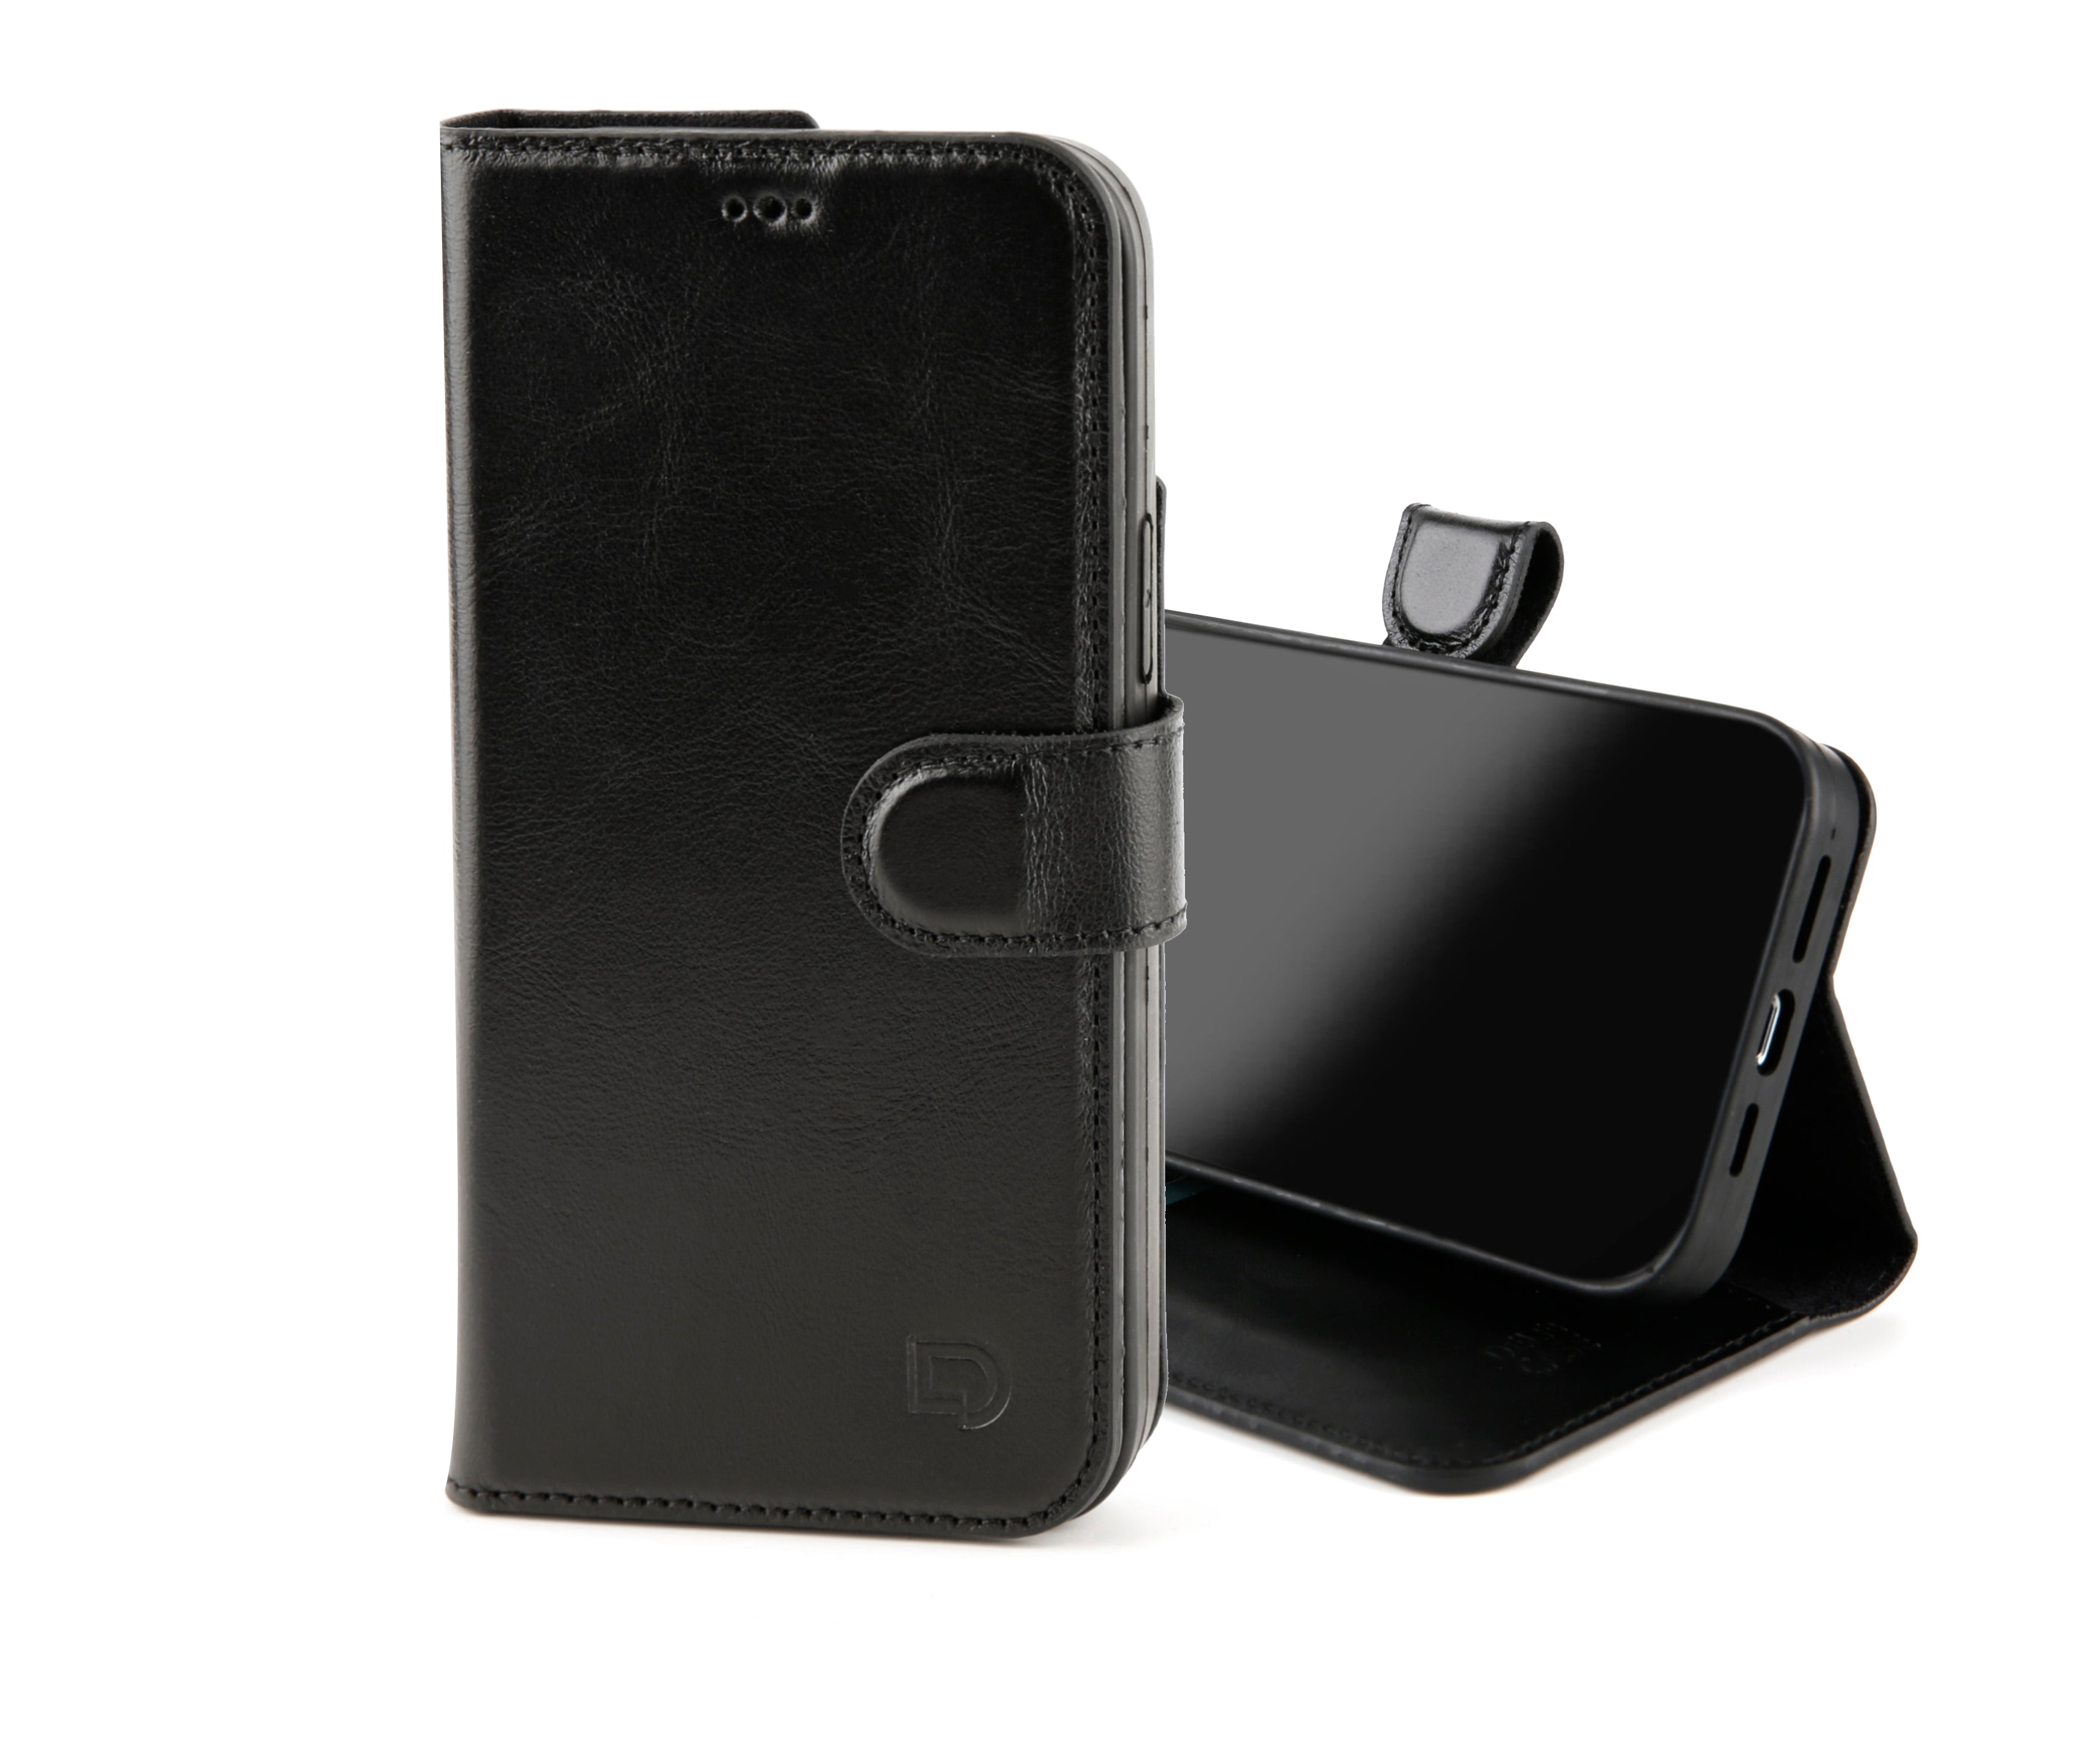 Leather Wallet Case for iPhone 13 Pro